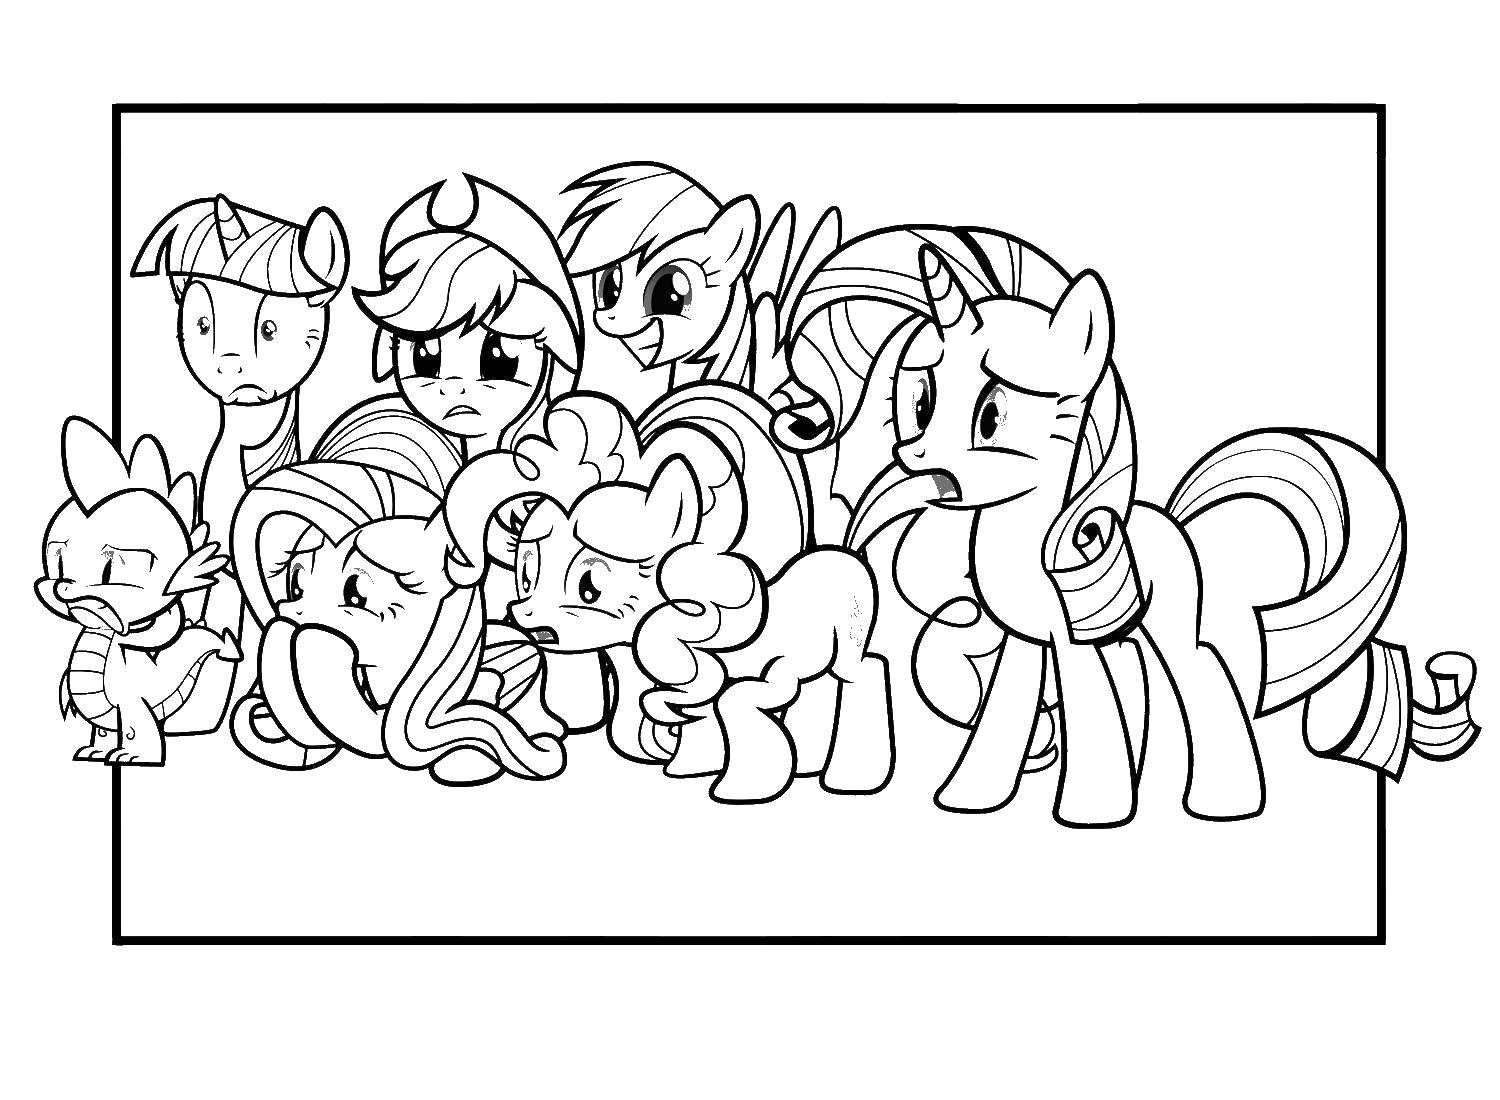 Coloring The frightened pony. Category Ponies. Tags:  Pony, My little pony.